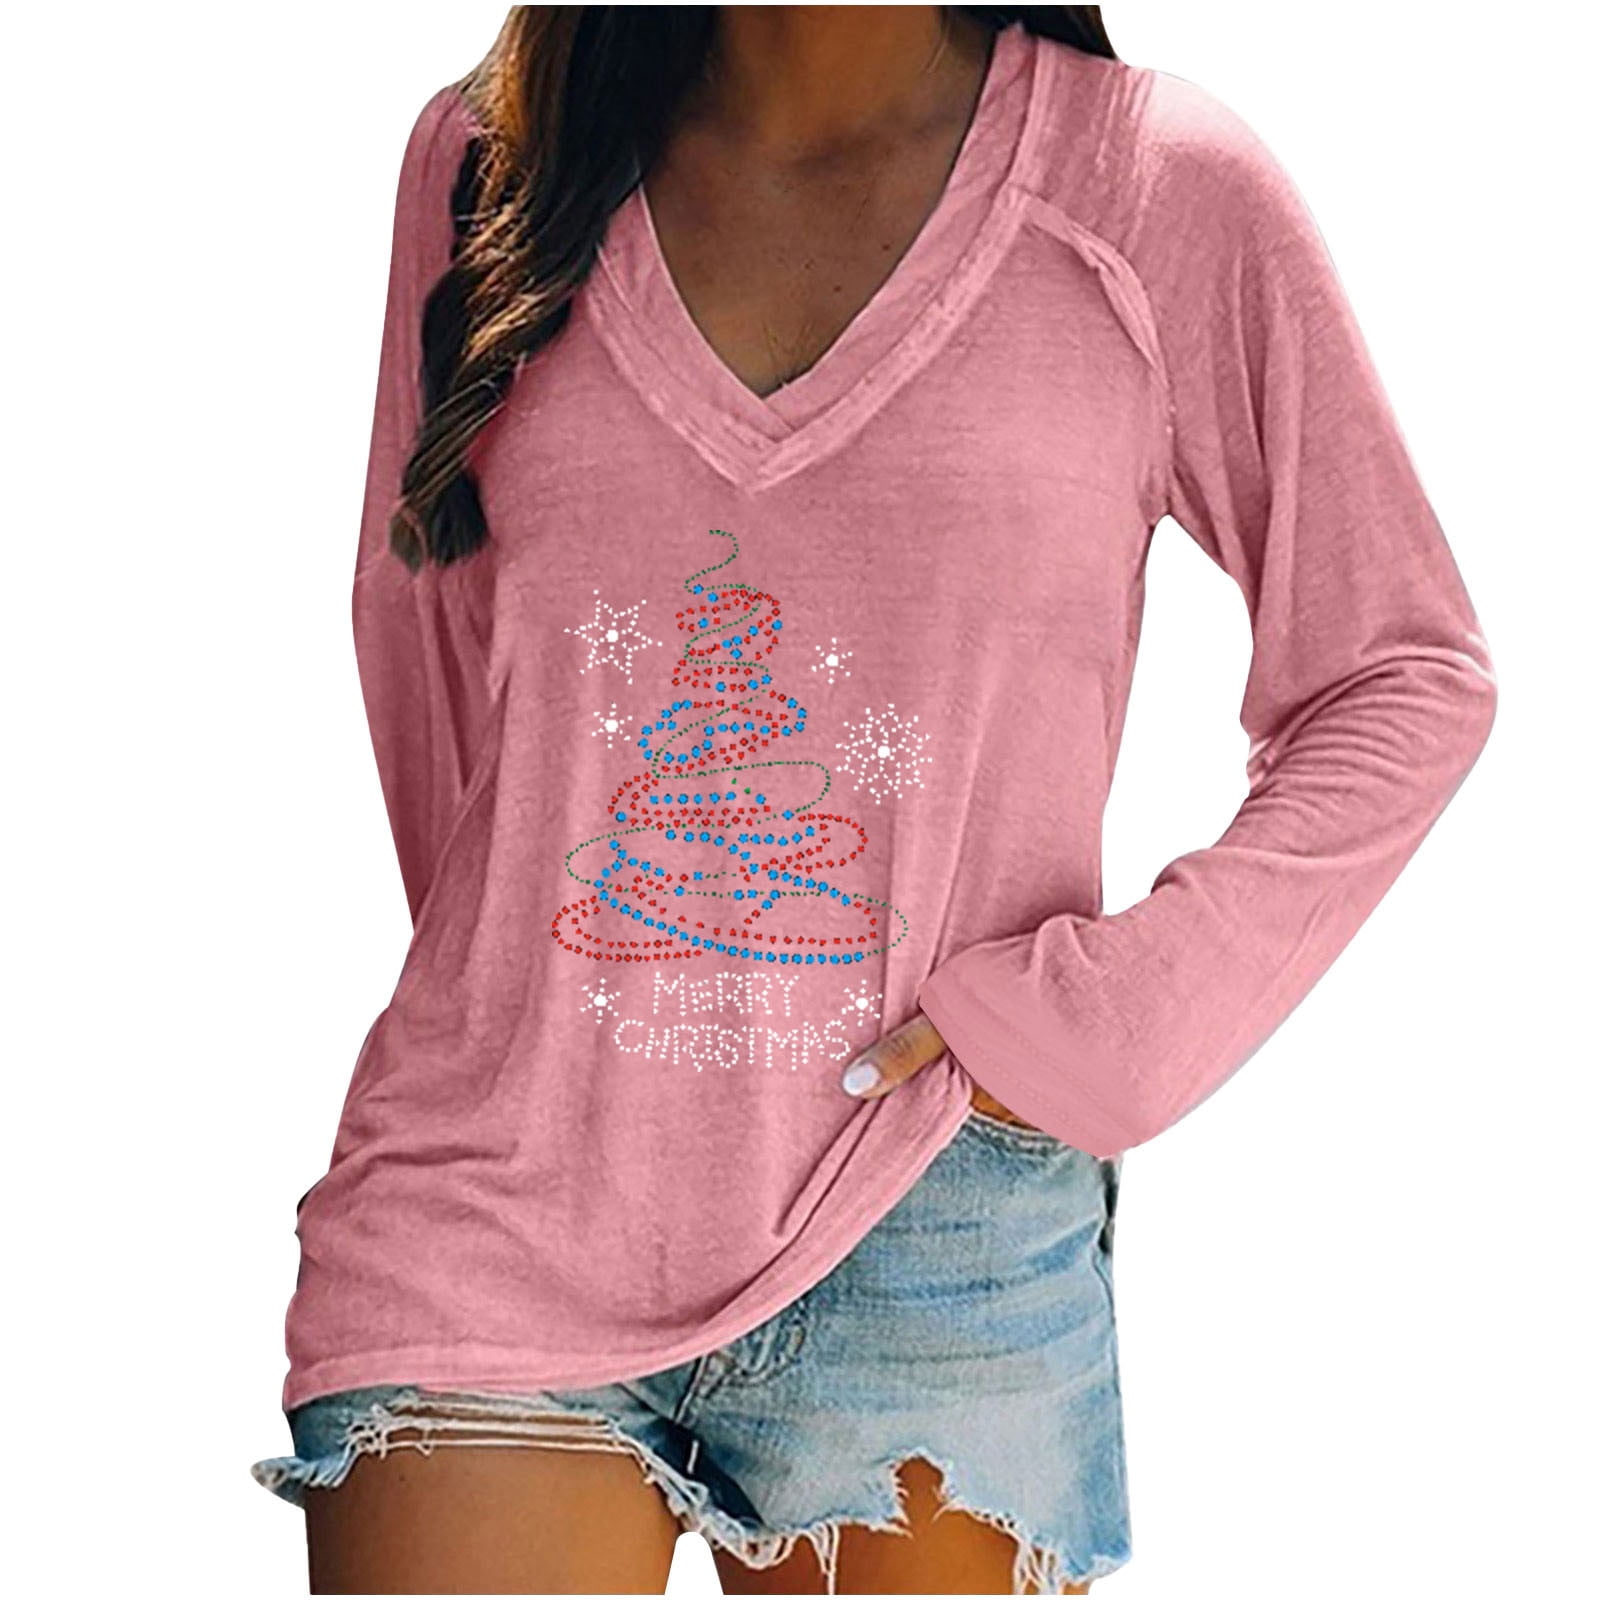 Czhjs Merry Christmas Trendy Western Tops for Ladies V-Neck Pullover Long Sleeve T Shirts Plus Size Tops Womens Fall Fashion Letter Print Sweatshirts